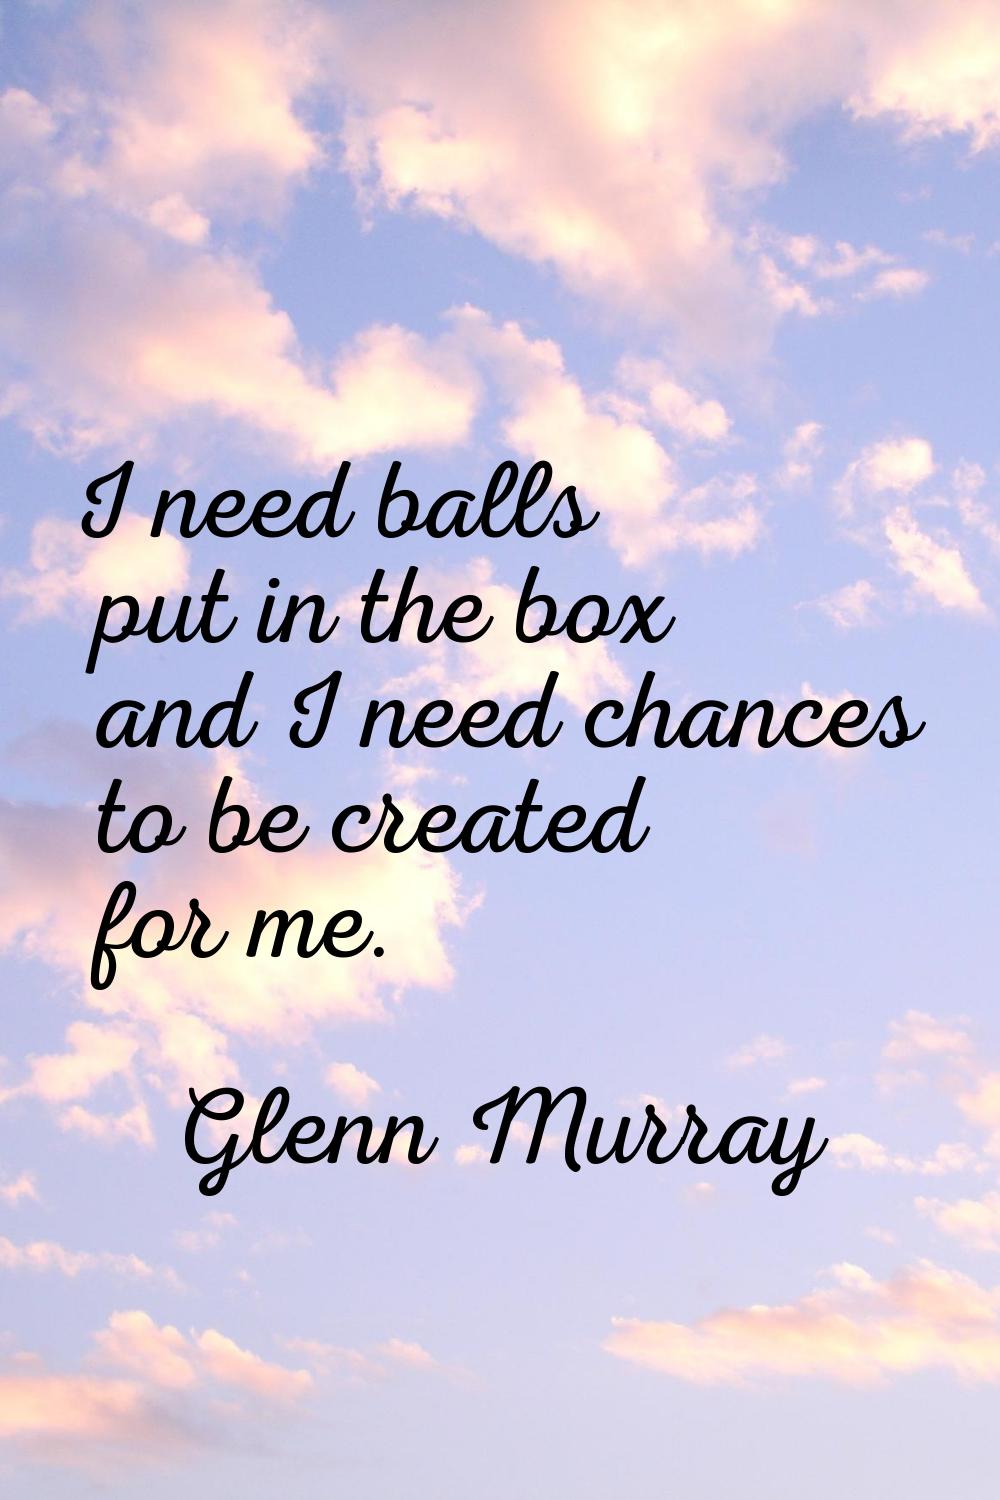 I need balls put in the box and I need chances to be created for me.